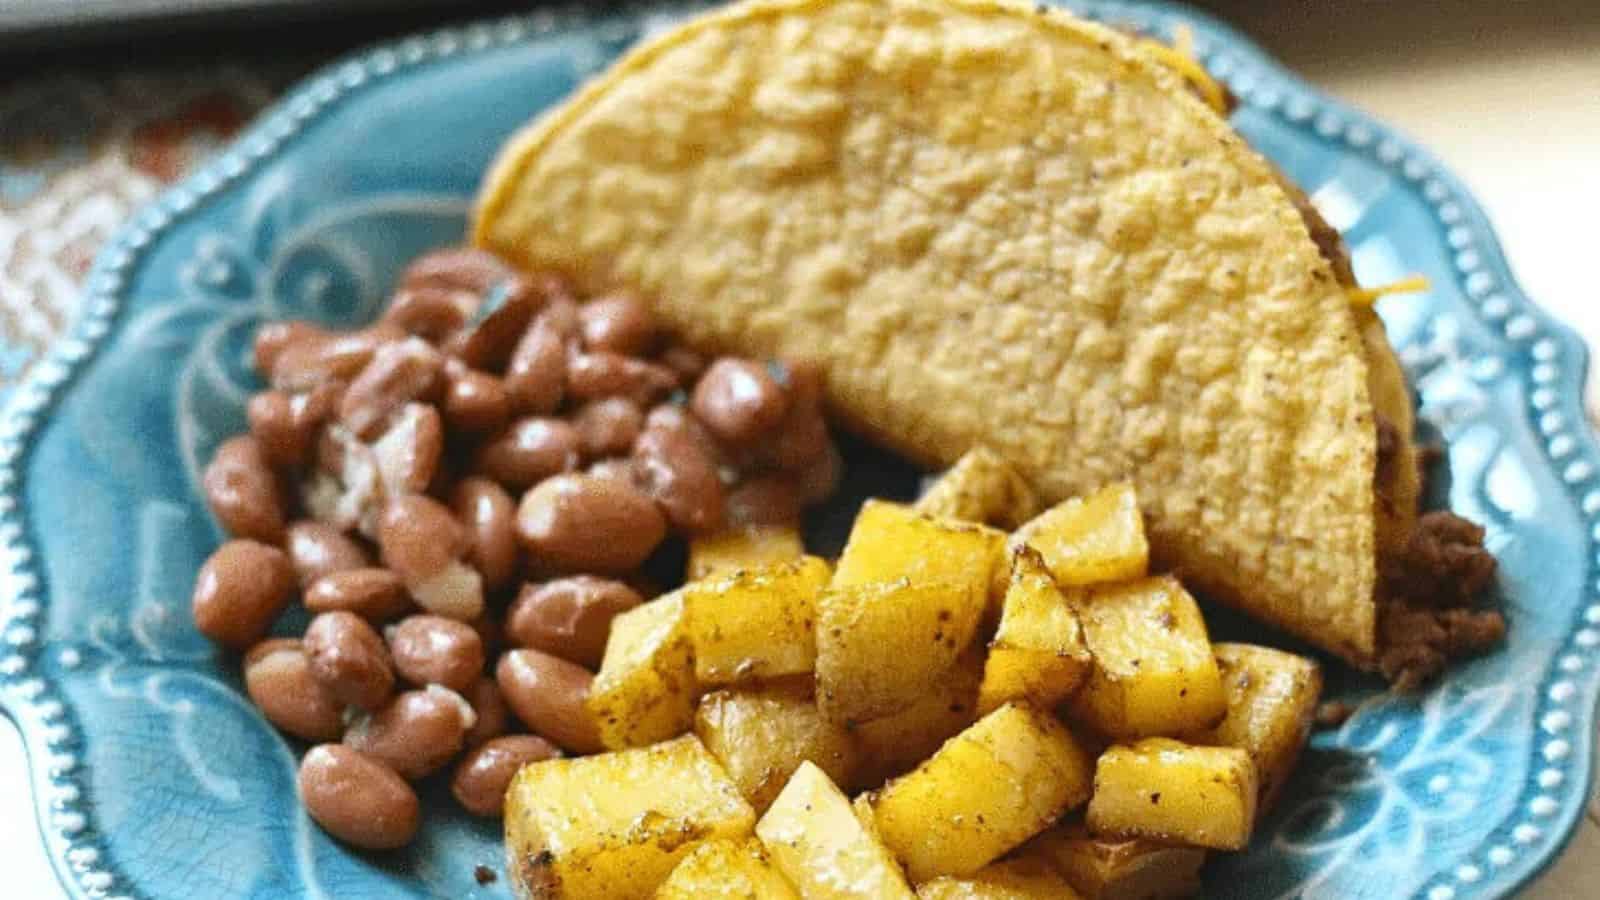 Taco potatoes on a plate with a taco and beans.